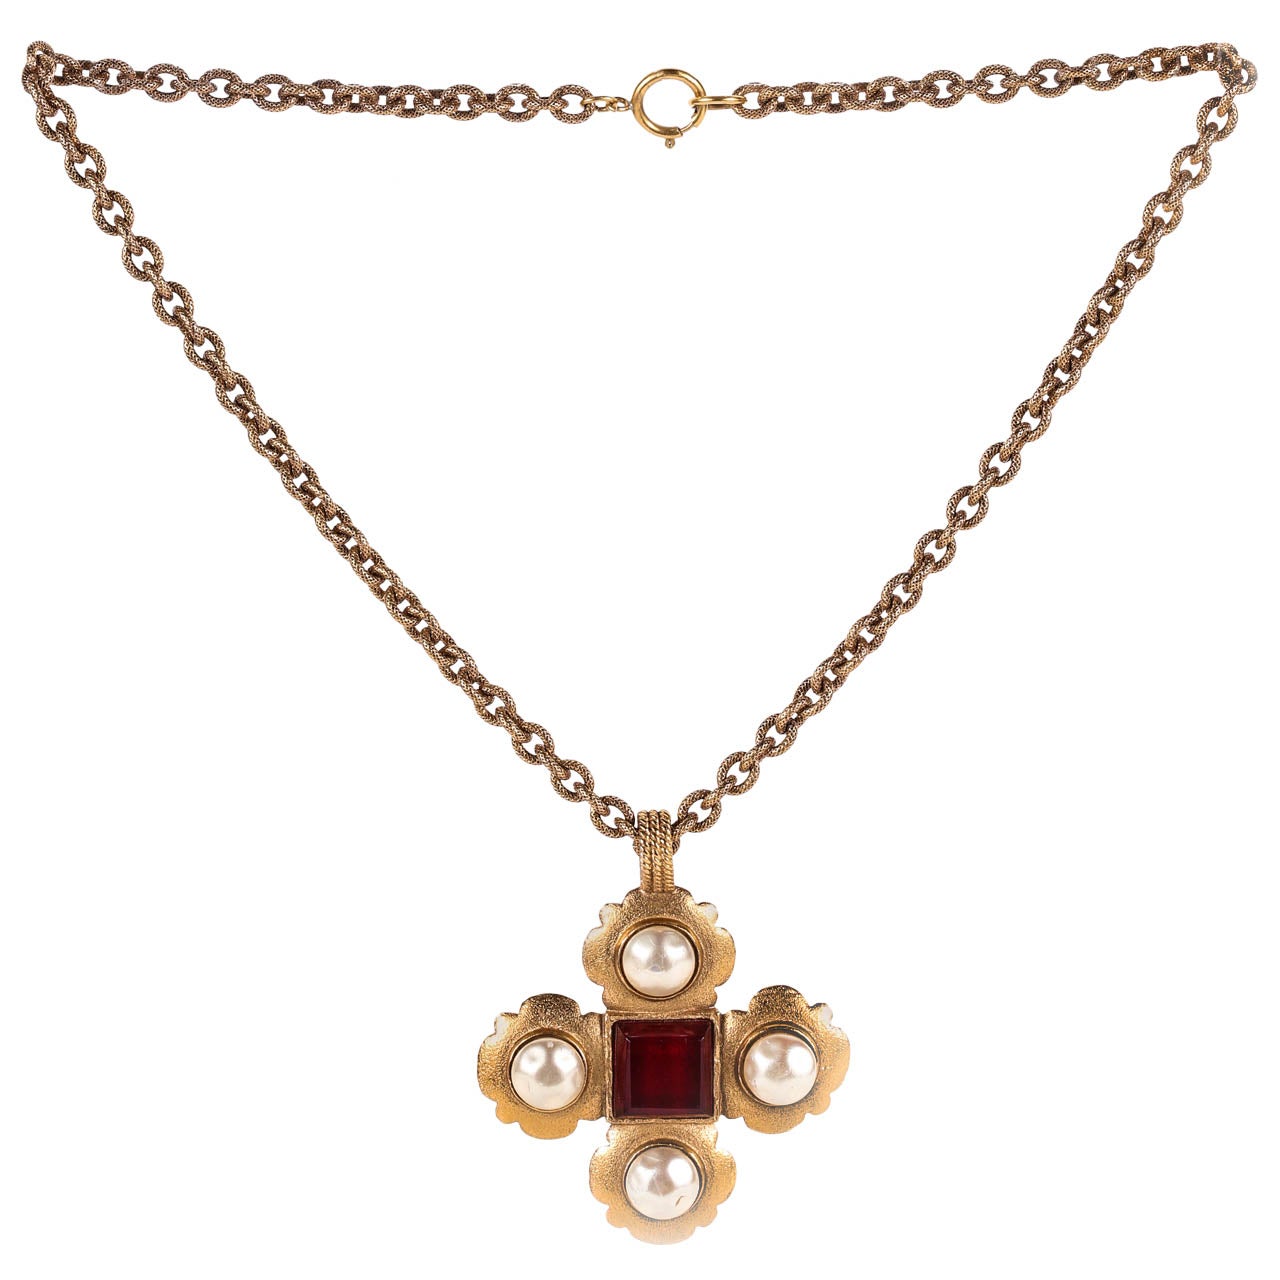 A statement making necklace by Chanel with a Maltese cross pendant set with an emerald cut piece of cranberry glass and dimpled glass pearls. The chain itself is beautifully detailed with a textured pattern (see Image 4). The length given below is